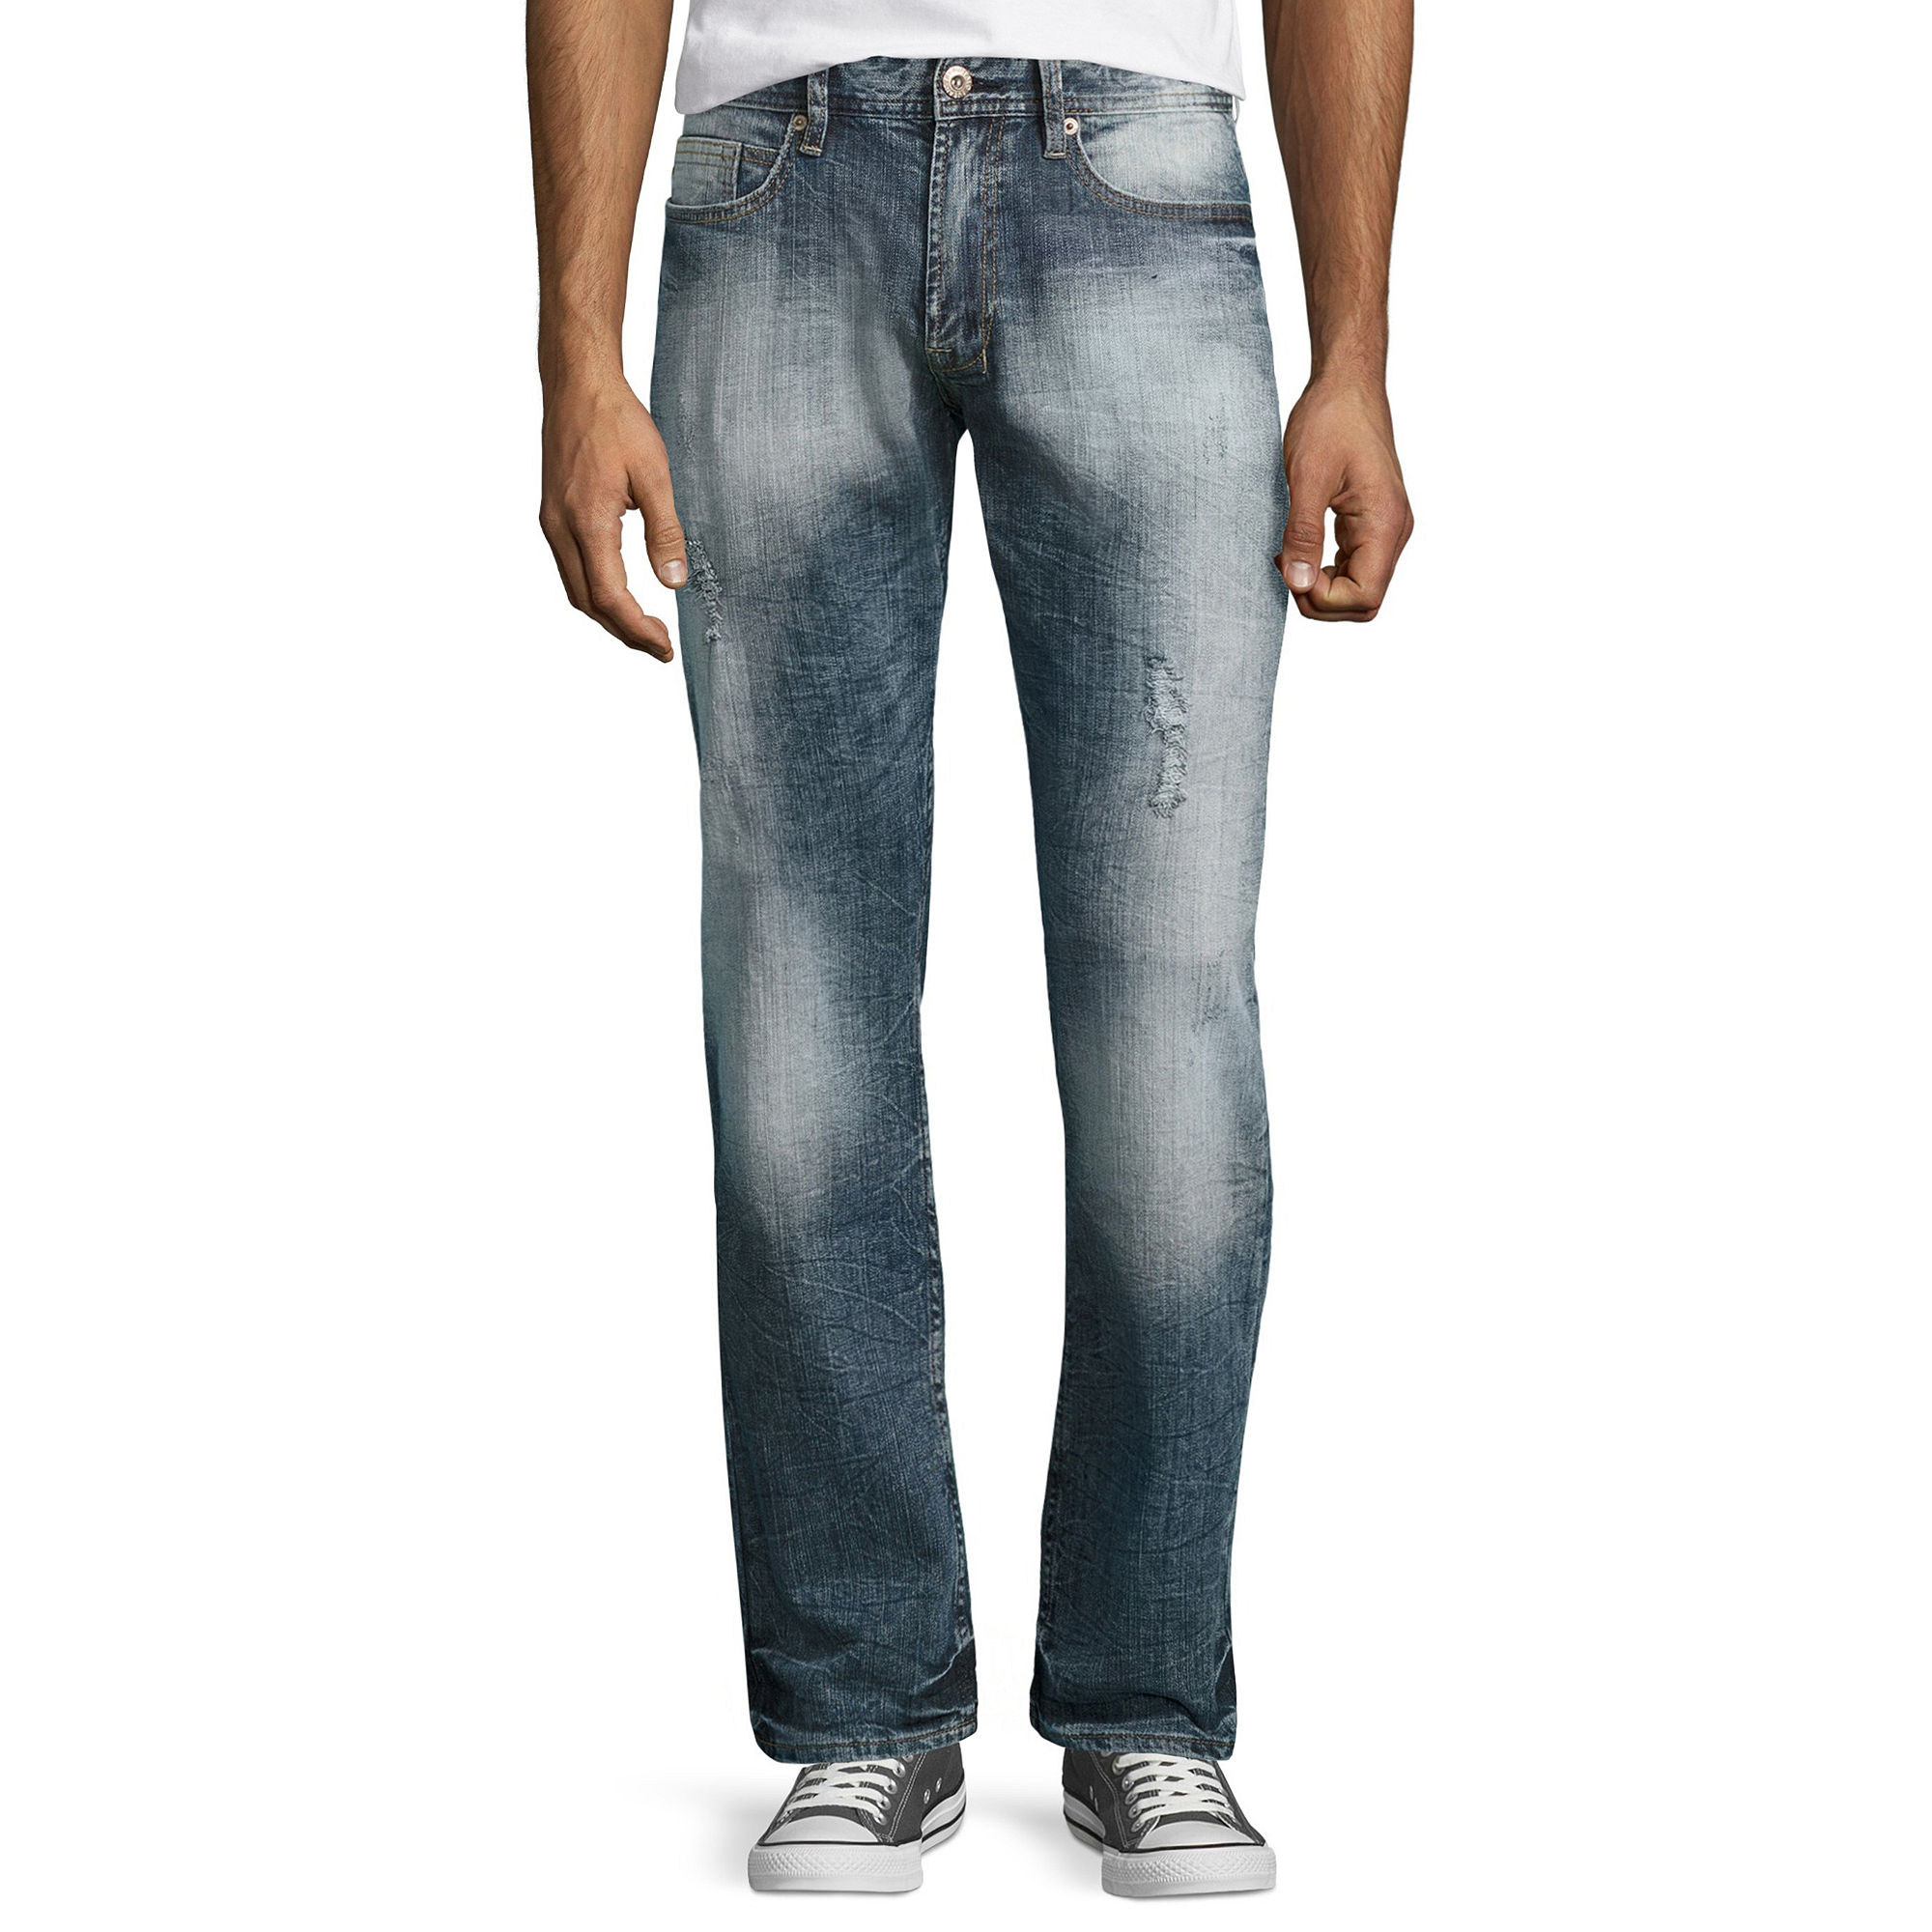 GET i jeans by Buffalo Taylor Jeans LIMITED